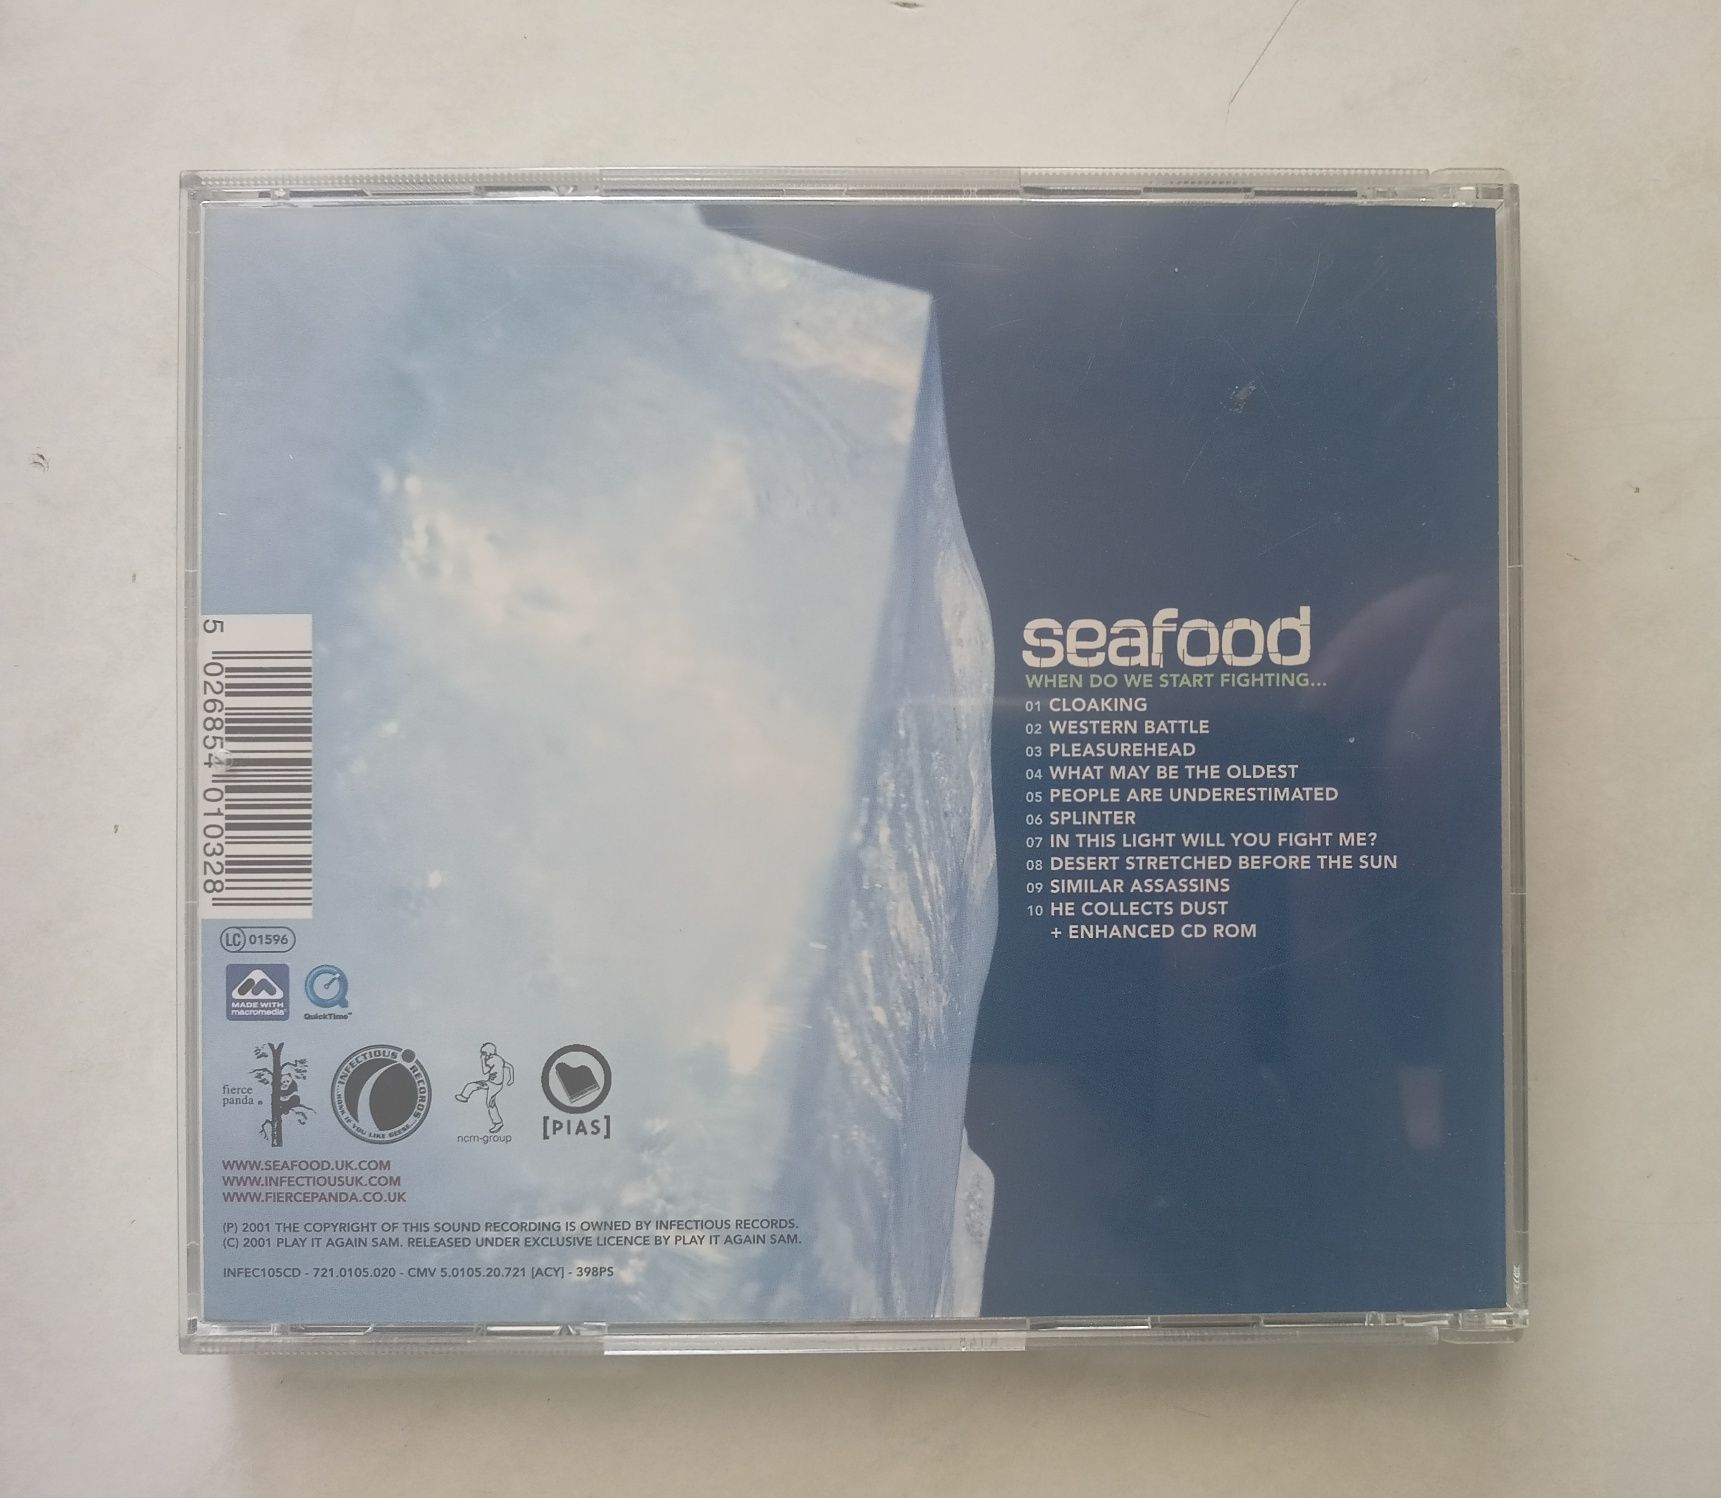 Seafood - When do we start fighting... CD